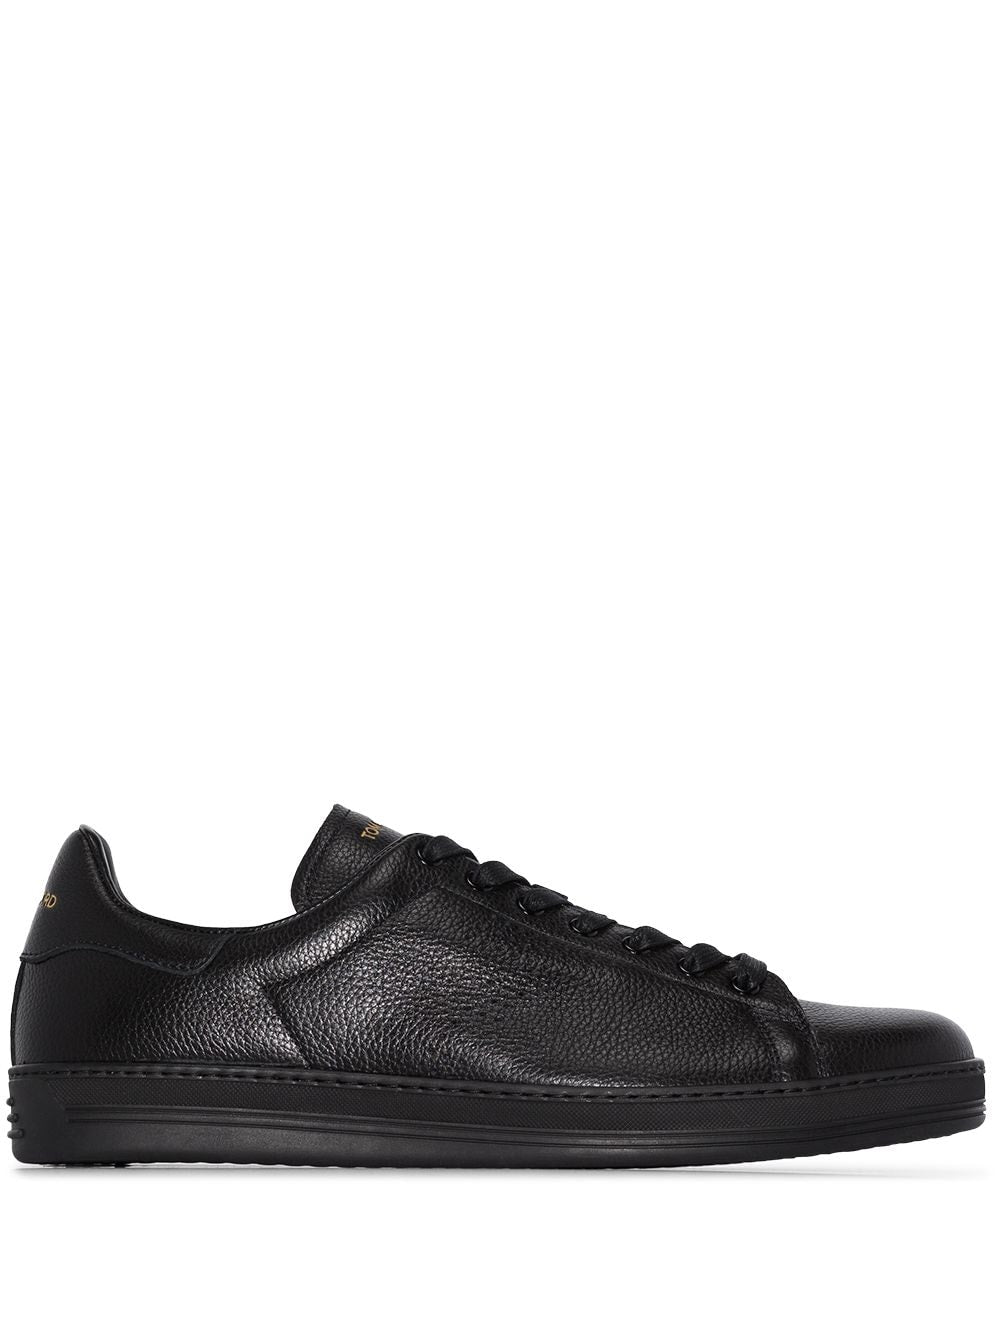 TOM FORD Warwick Grained Leather Sneakers Black